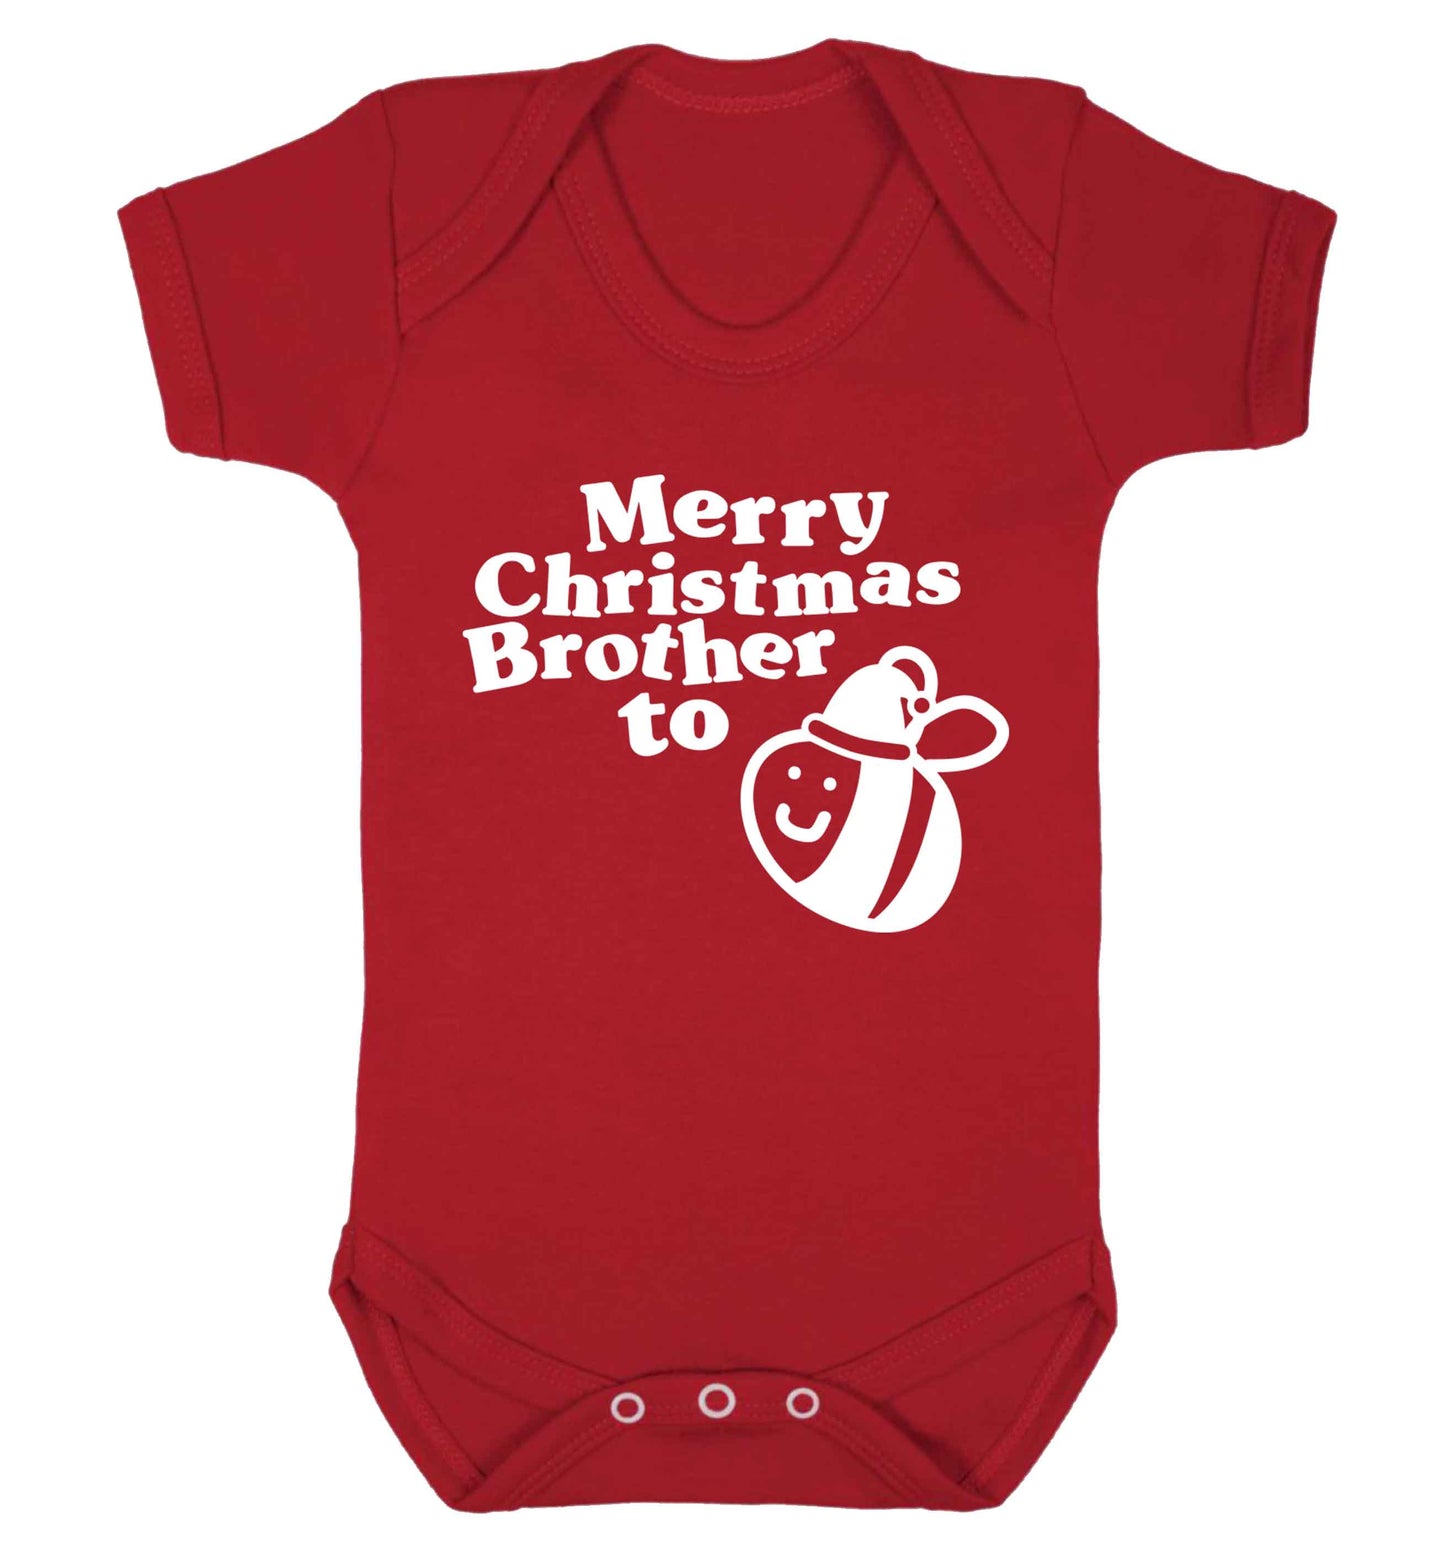 Merry Christmas brother to be Baby Vest red 18-24 months